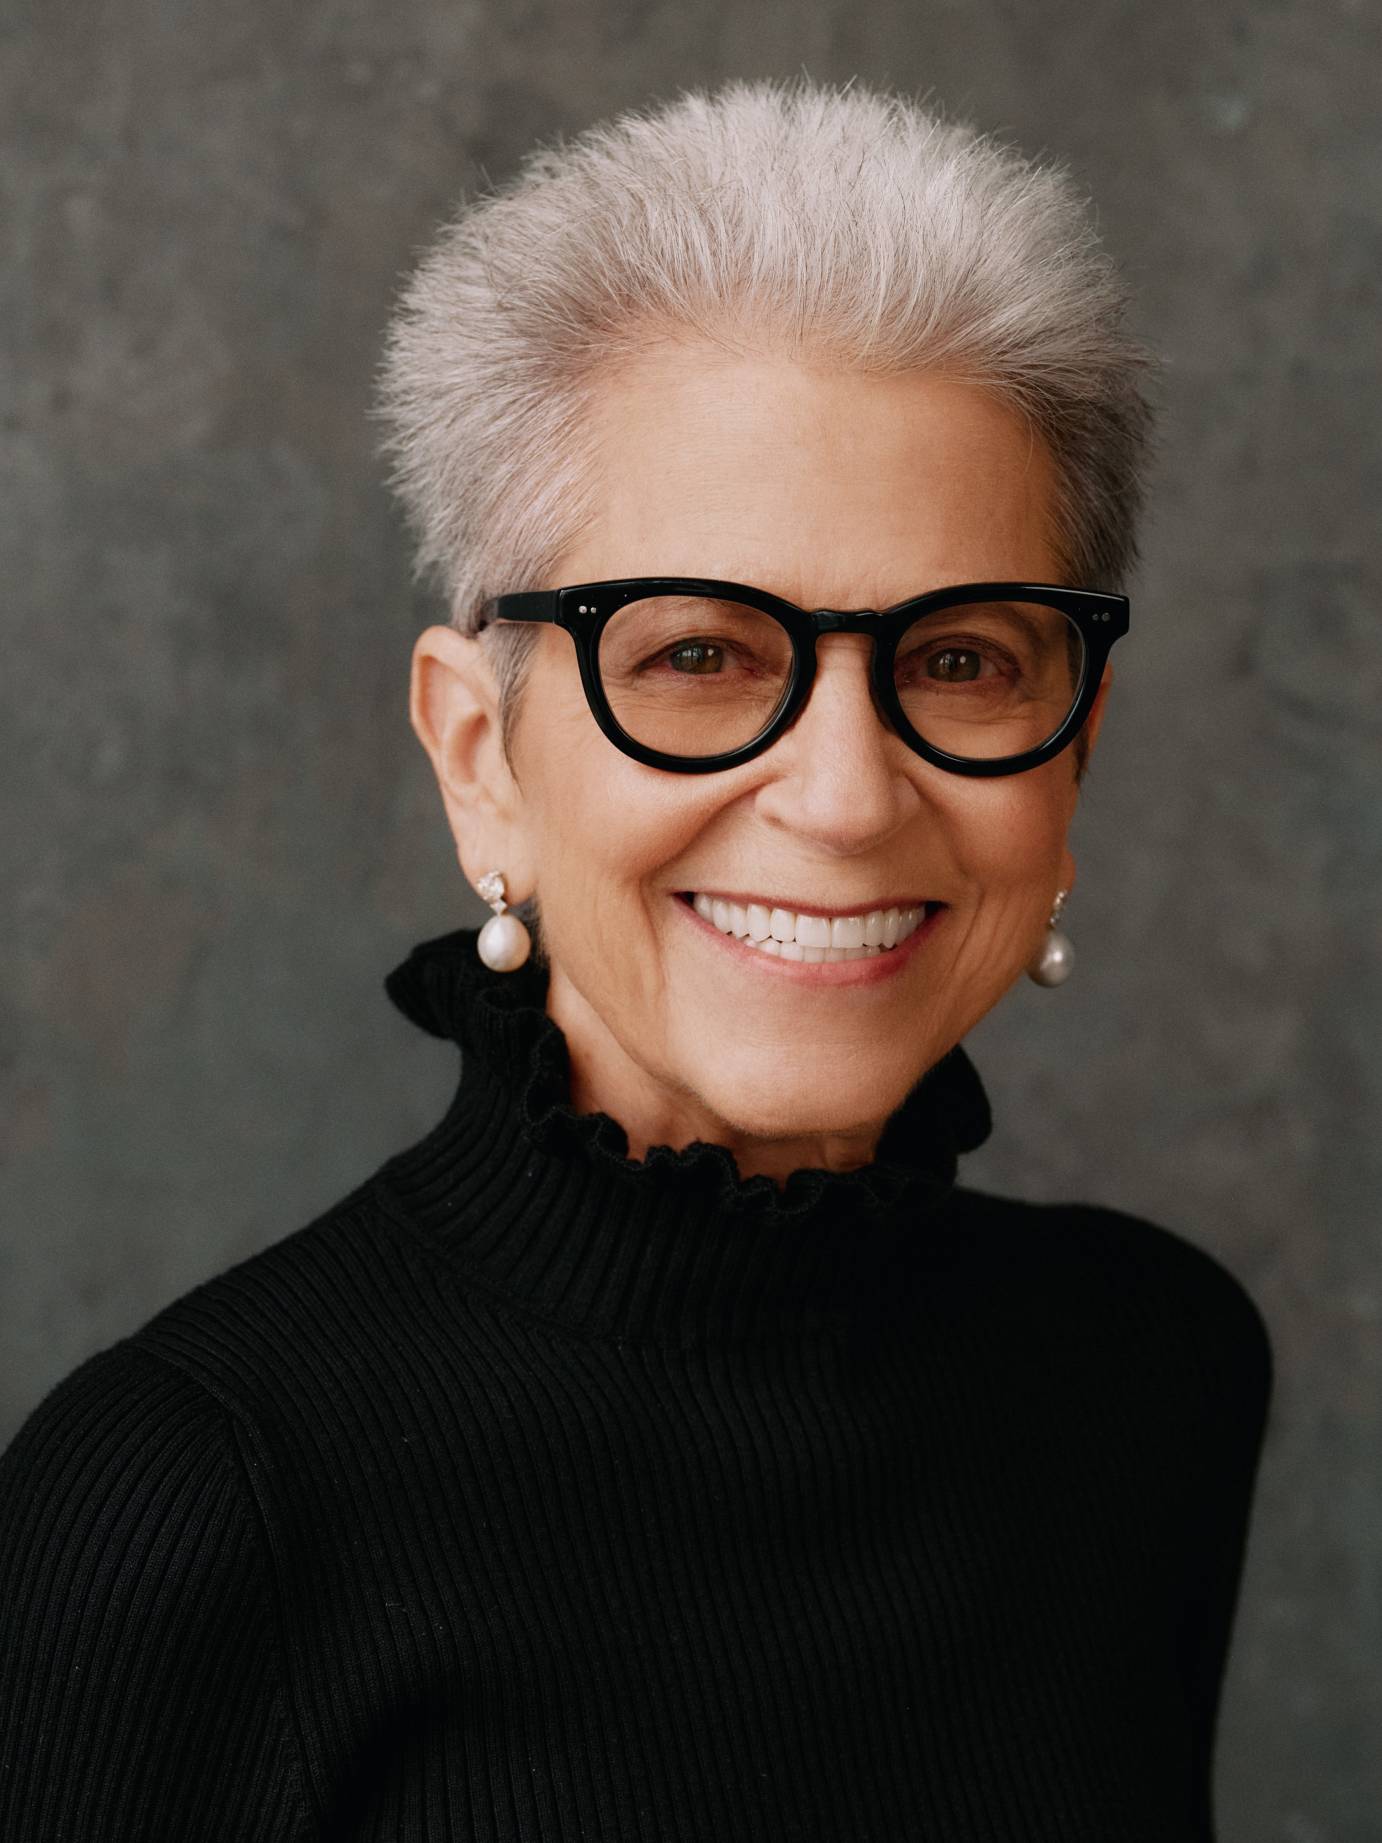 A smiling woman, with short-spiked white hair, big black framed glasses, dangling pearl earrings, and ruffled black turtleneck looks out to the camera.